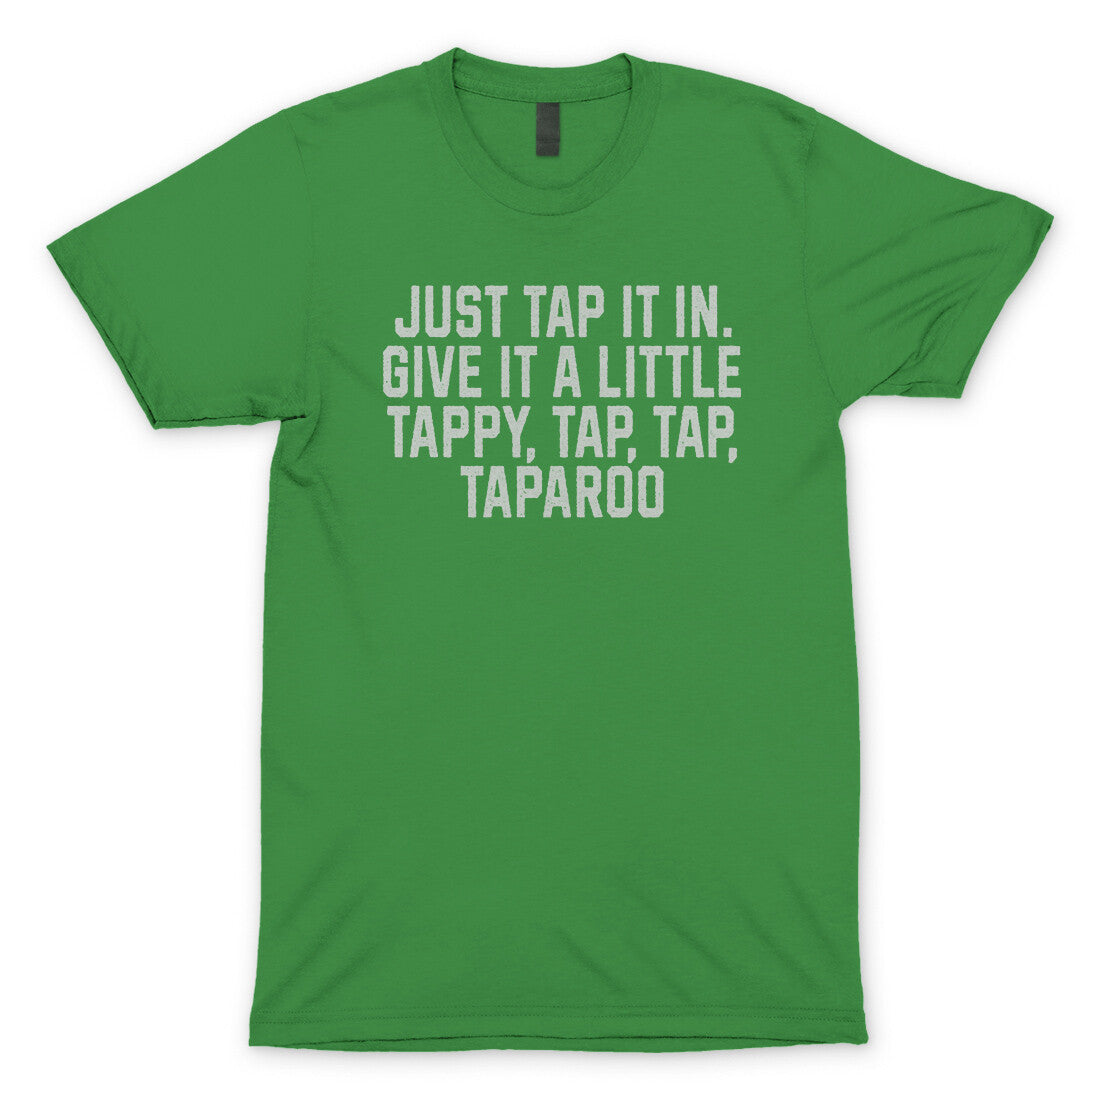 Just Tap it in Give it a Little Tappy Tap Tap Taparoo in Irish Green Color